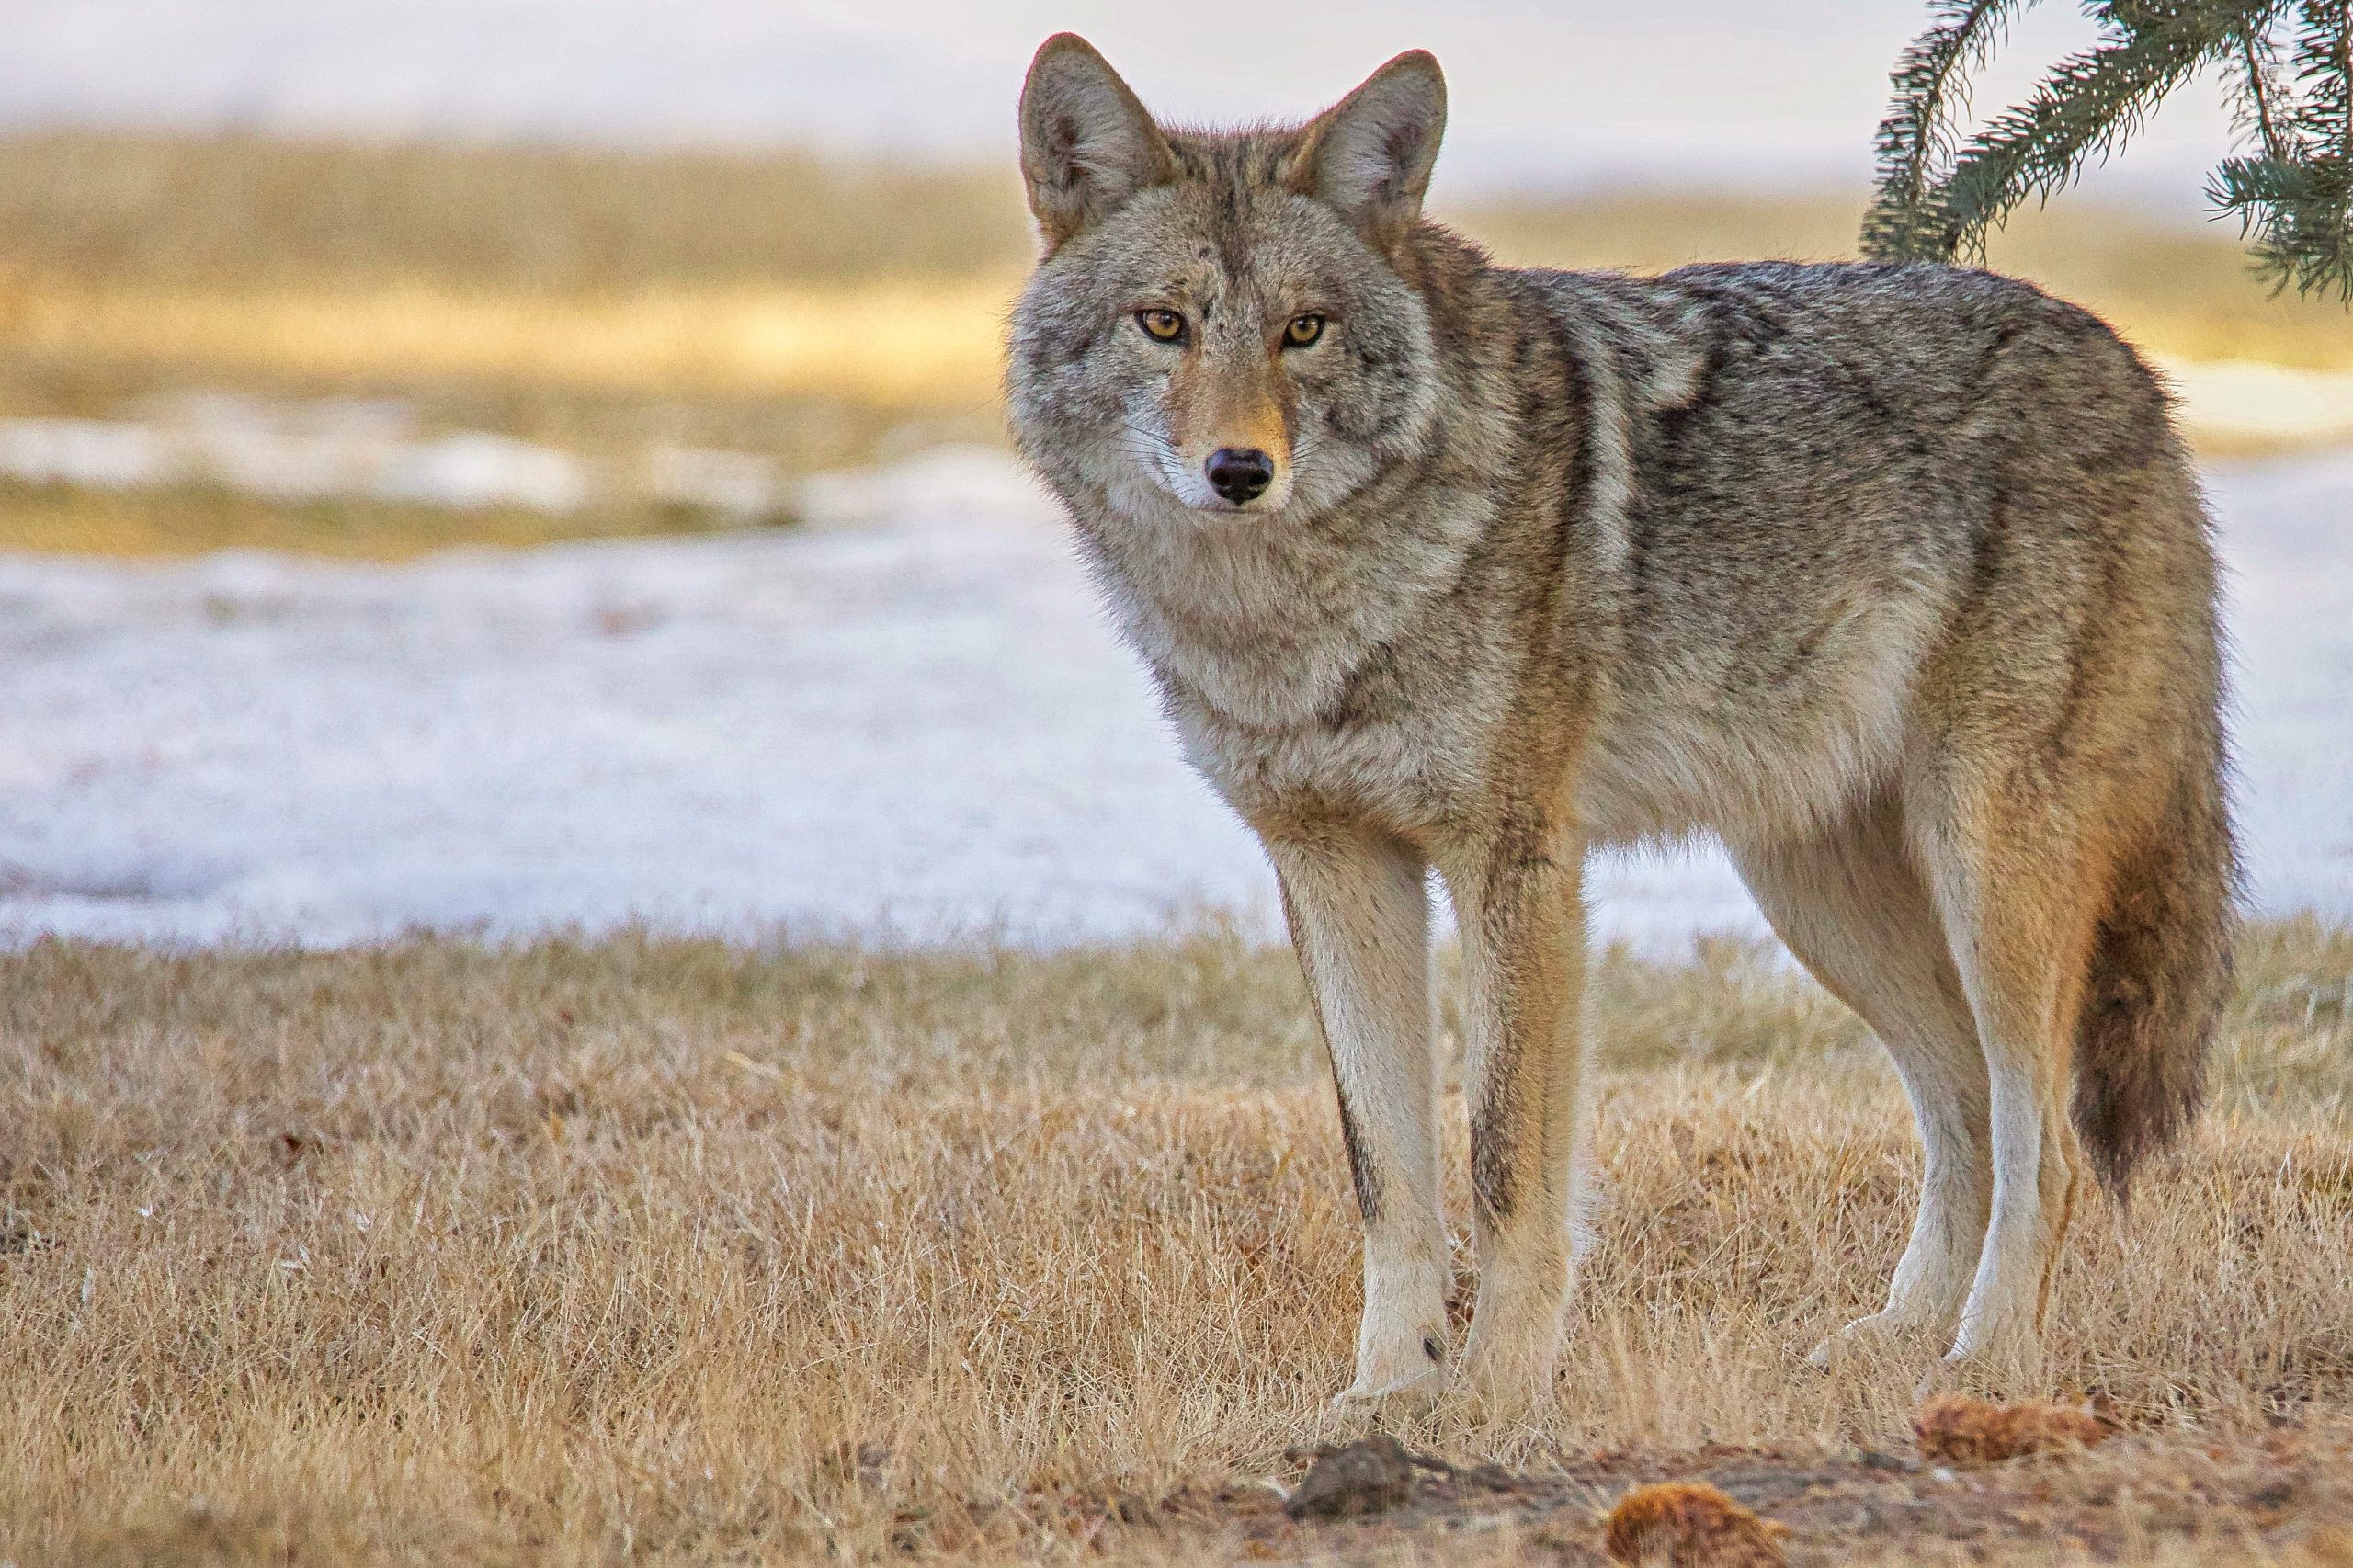 Most cities have a sizeable coyote population, and coyote encounters have been steadily increasing in recent years. TONY LEPRIEUR